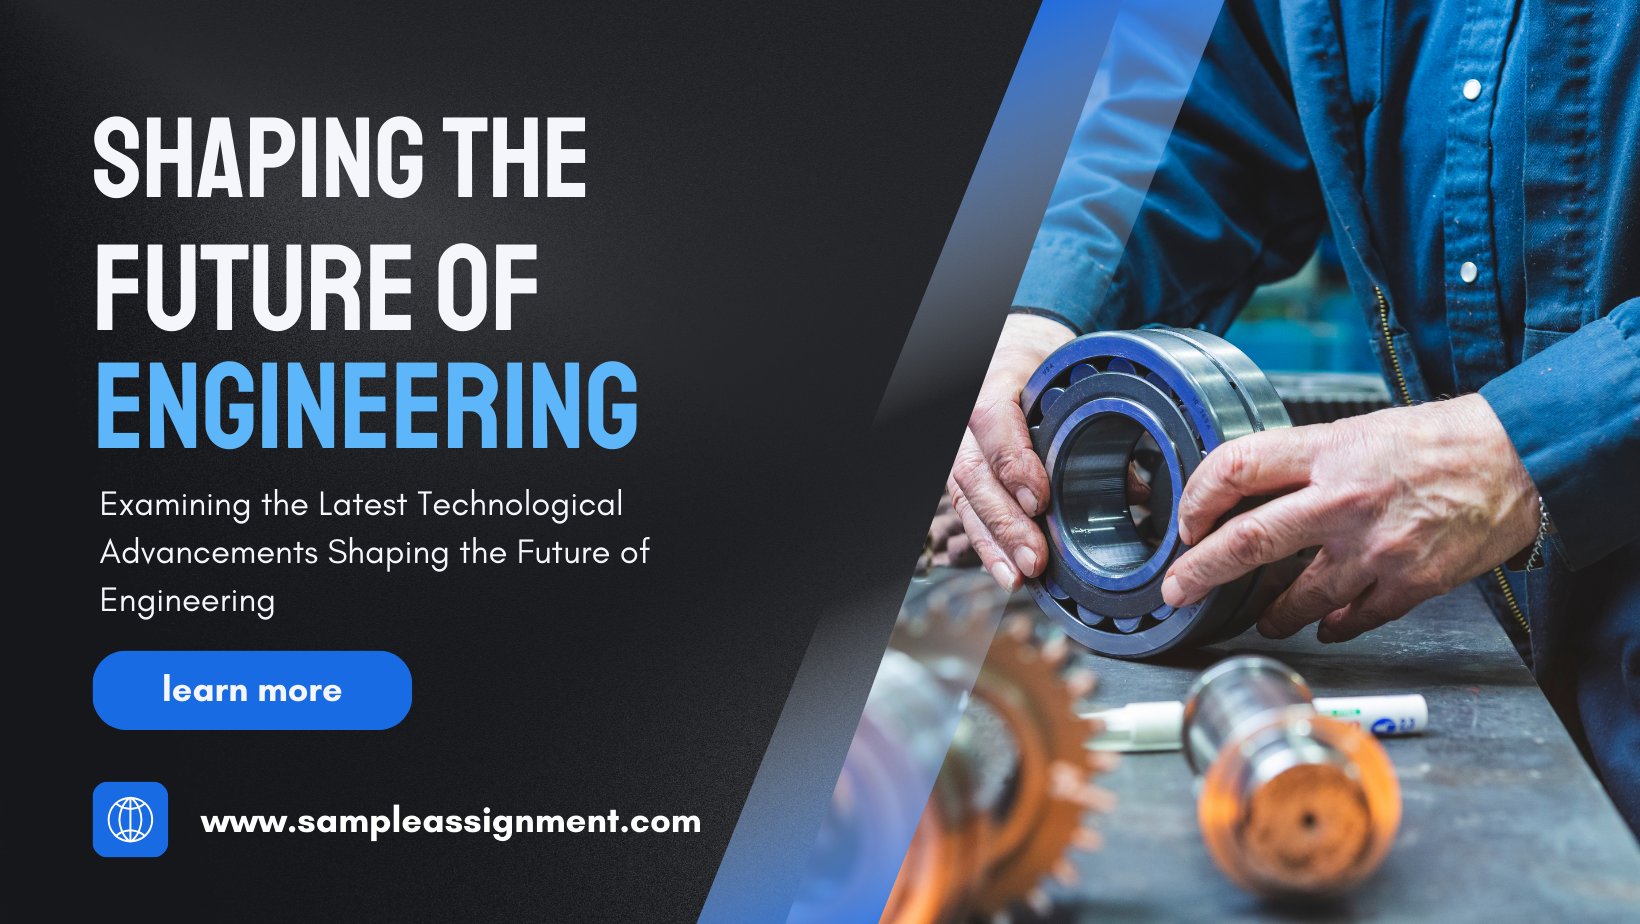 Examining the Latest Technological Advancements Shaping the Future of Engineering